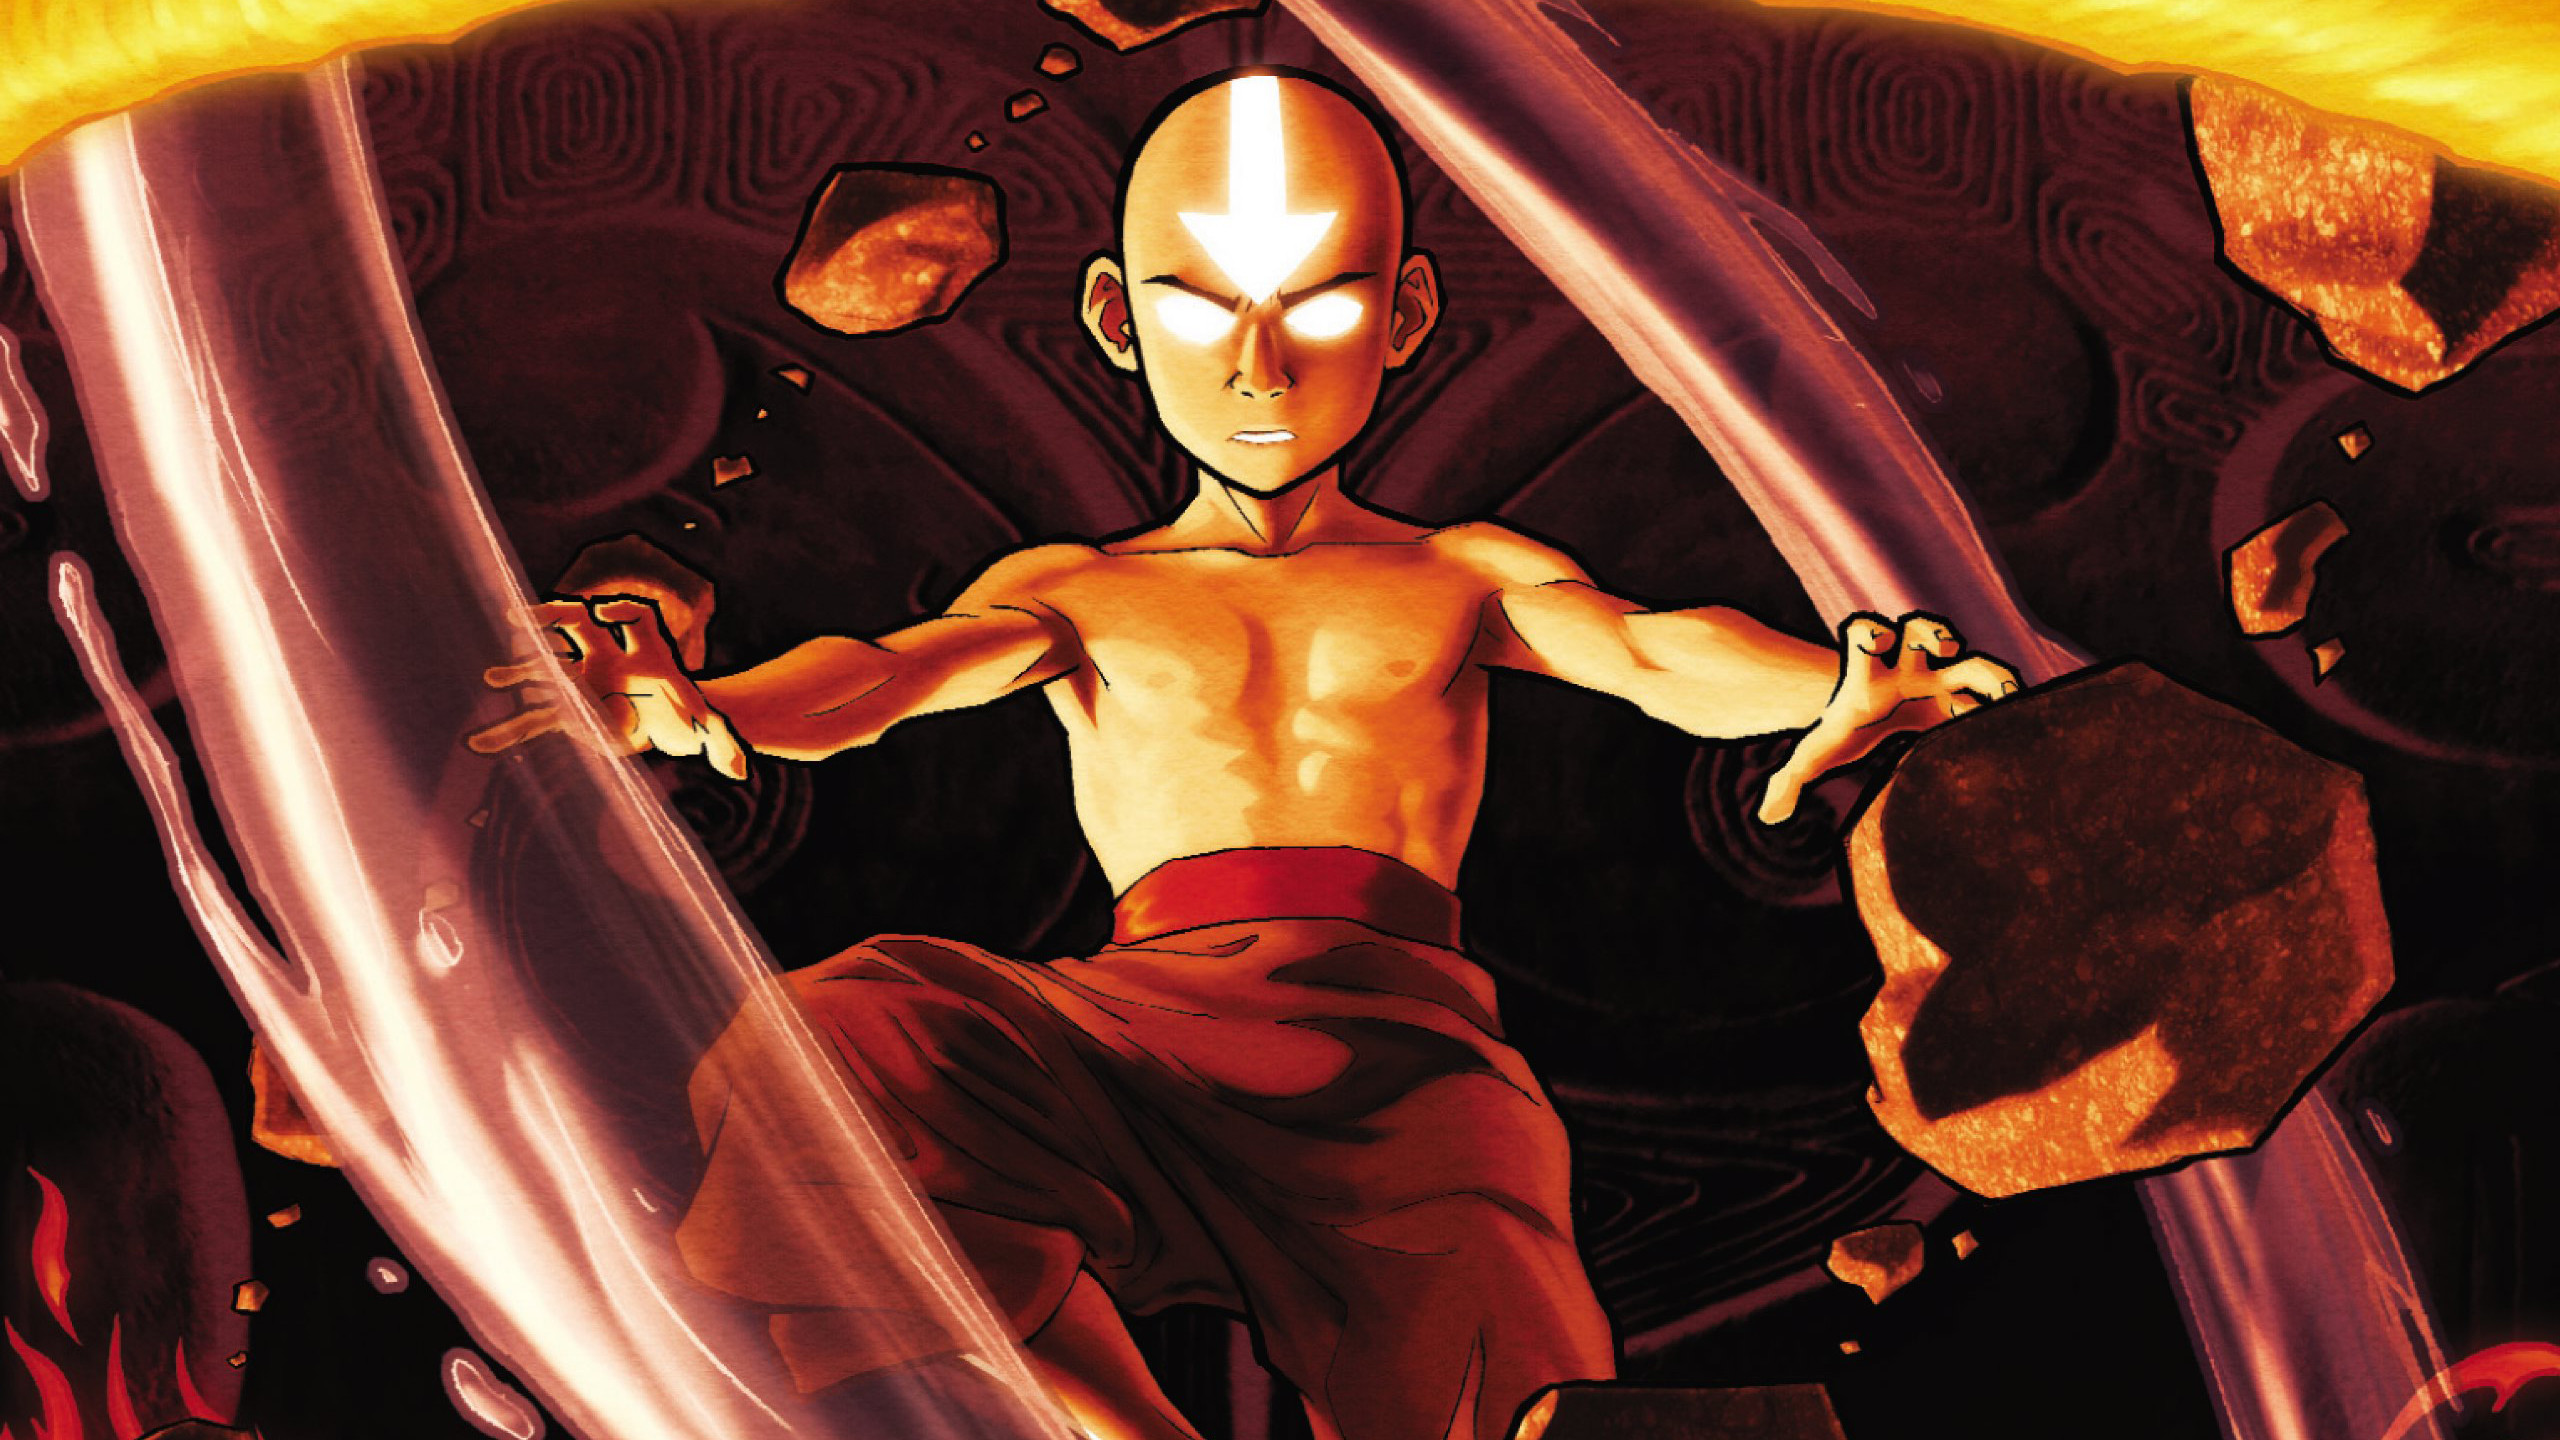 2560x1440 Tags: Anime, Avatar: The Last Airbender, Aang, HD Wallpaper, Scan